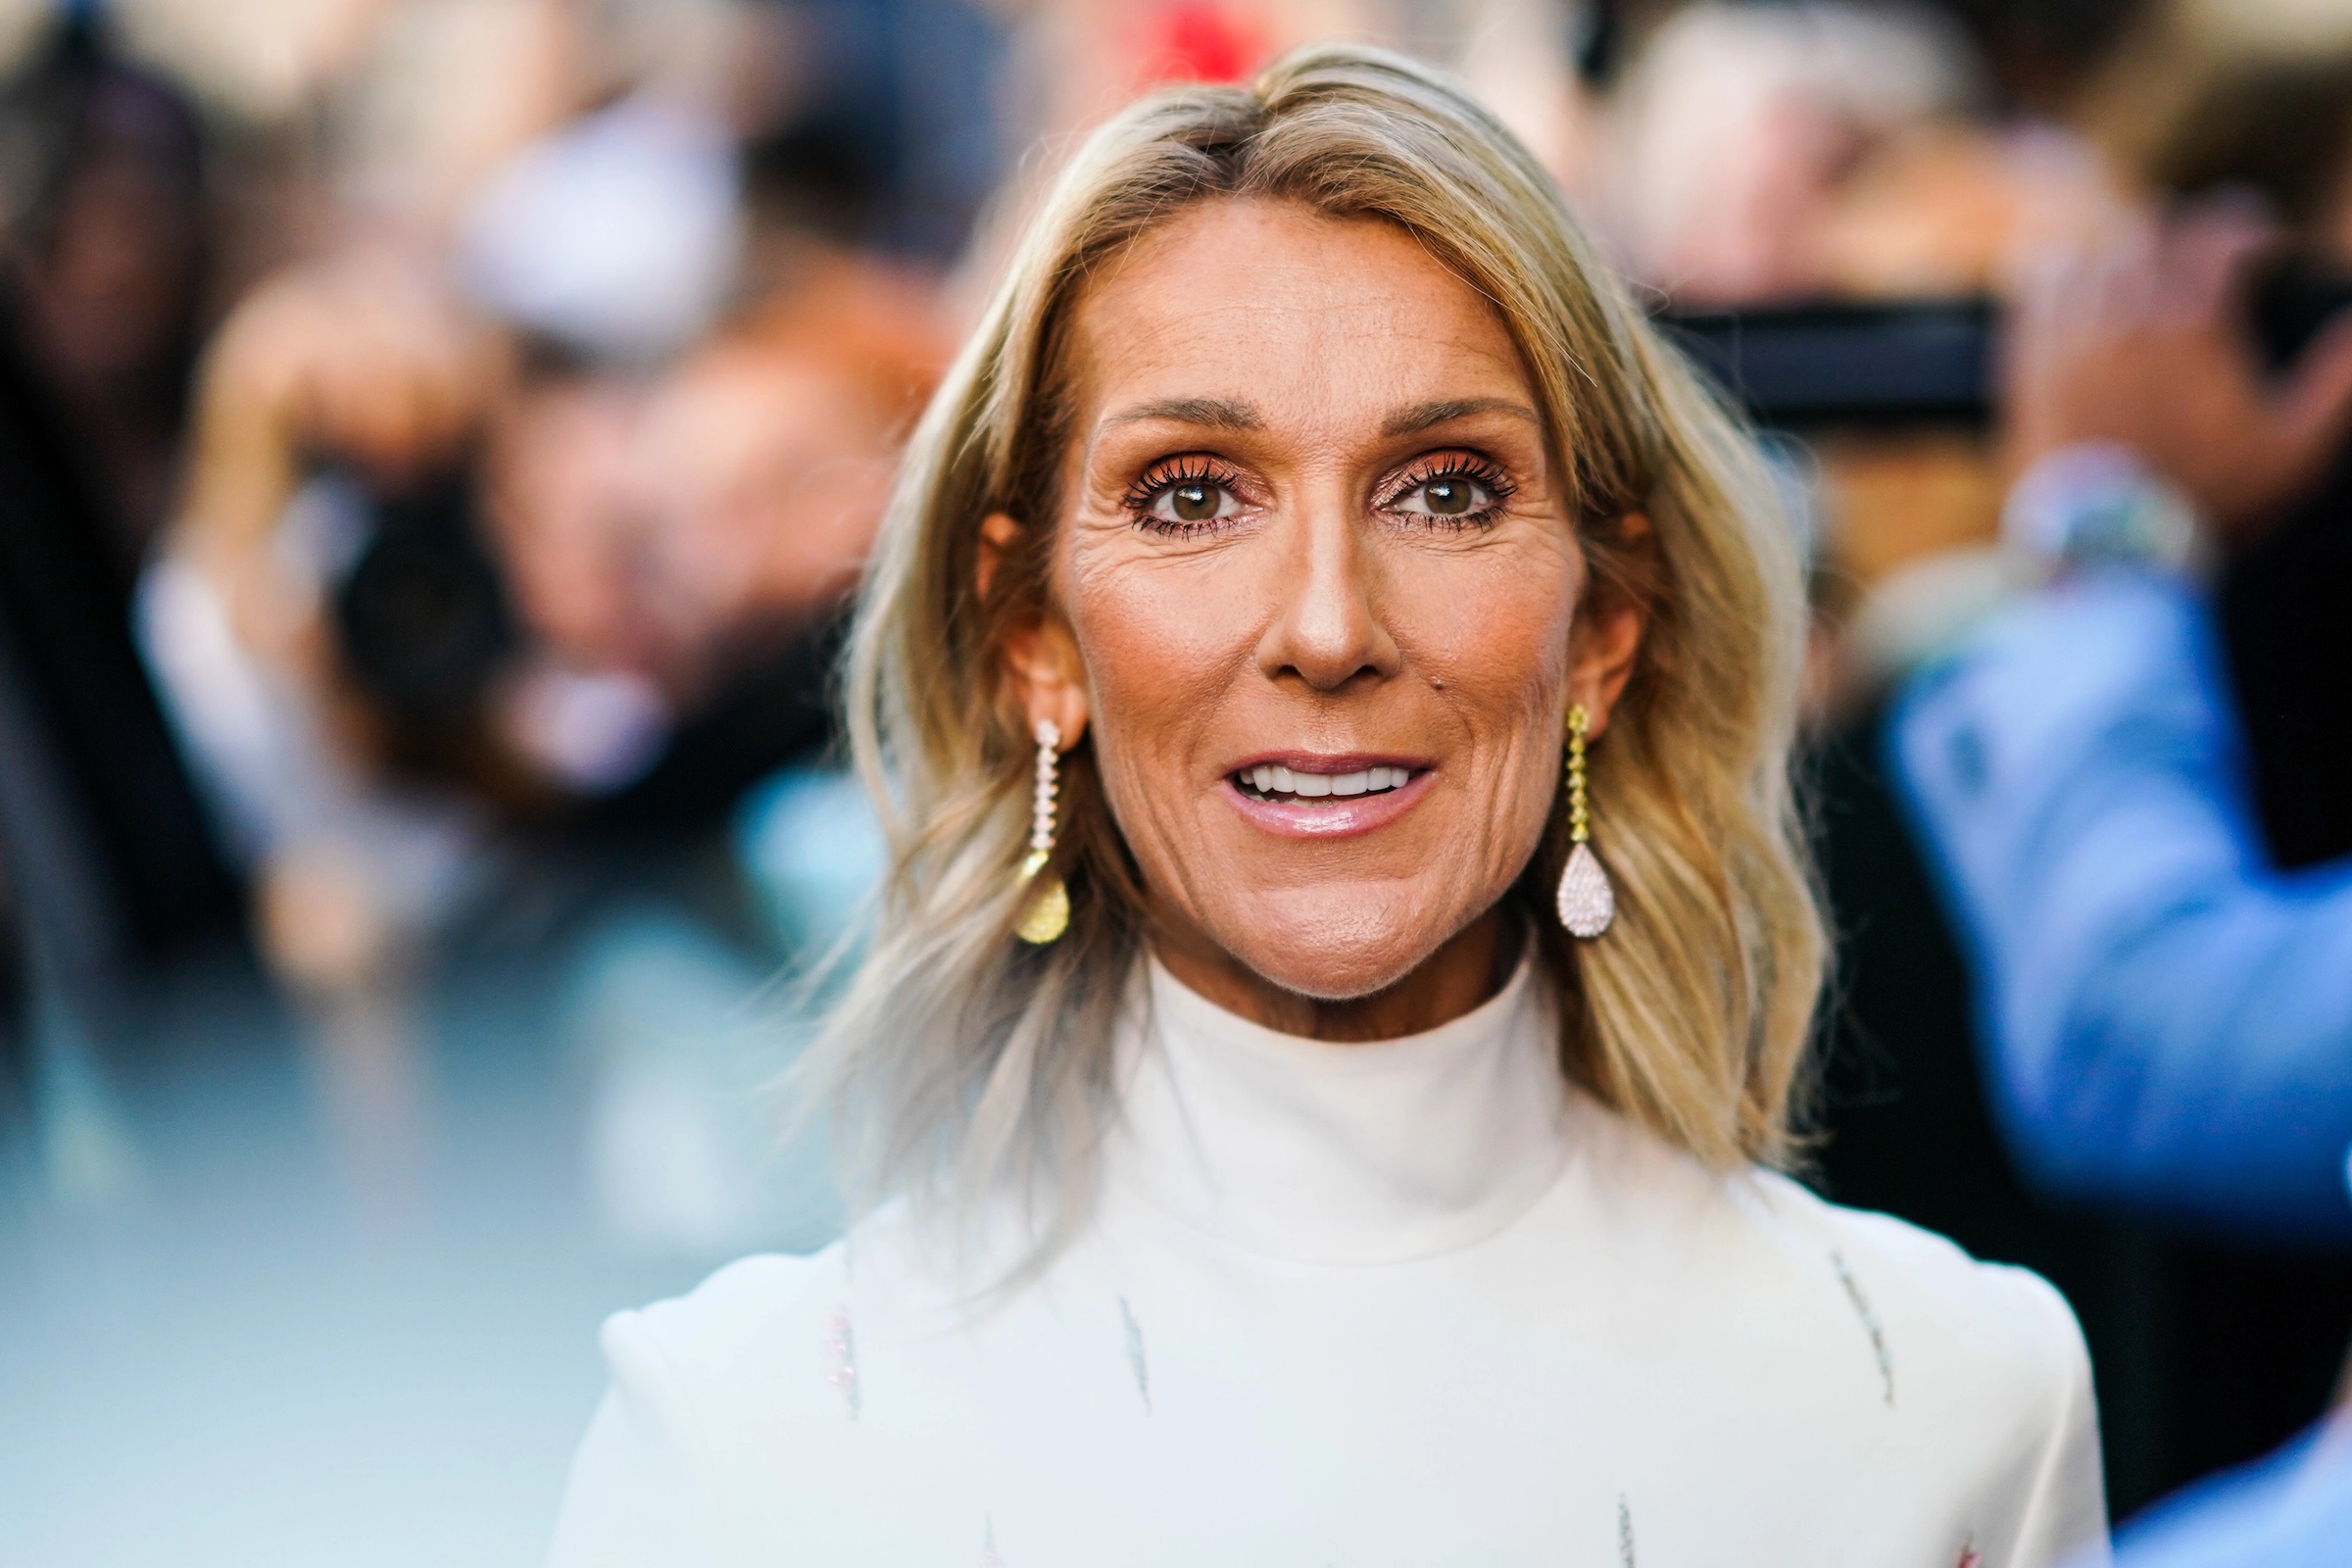 Take a nostalgia trip with the power ballads queen, Celine Dion. Dive into her discography, experience the emotional rollercoaster, and reconnect with the timeless appeal of Celine Dion songs.